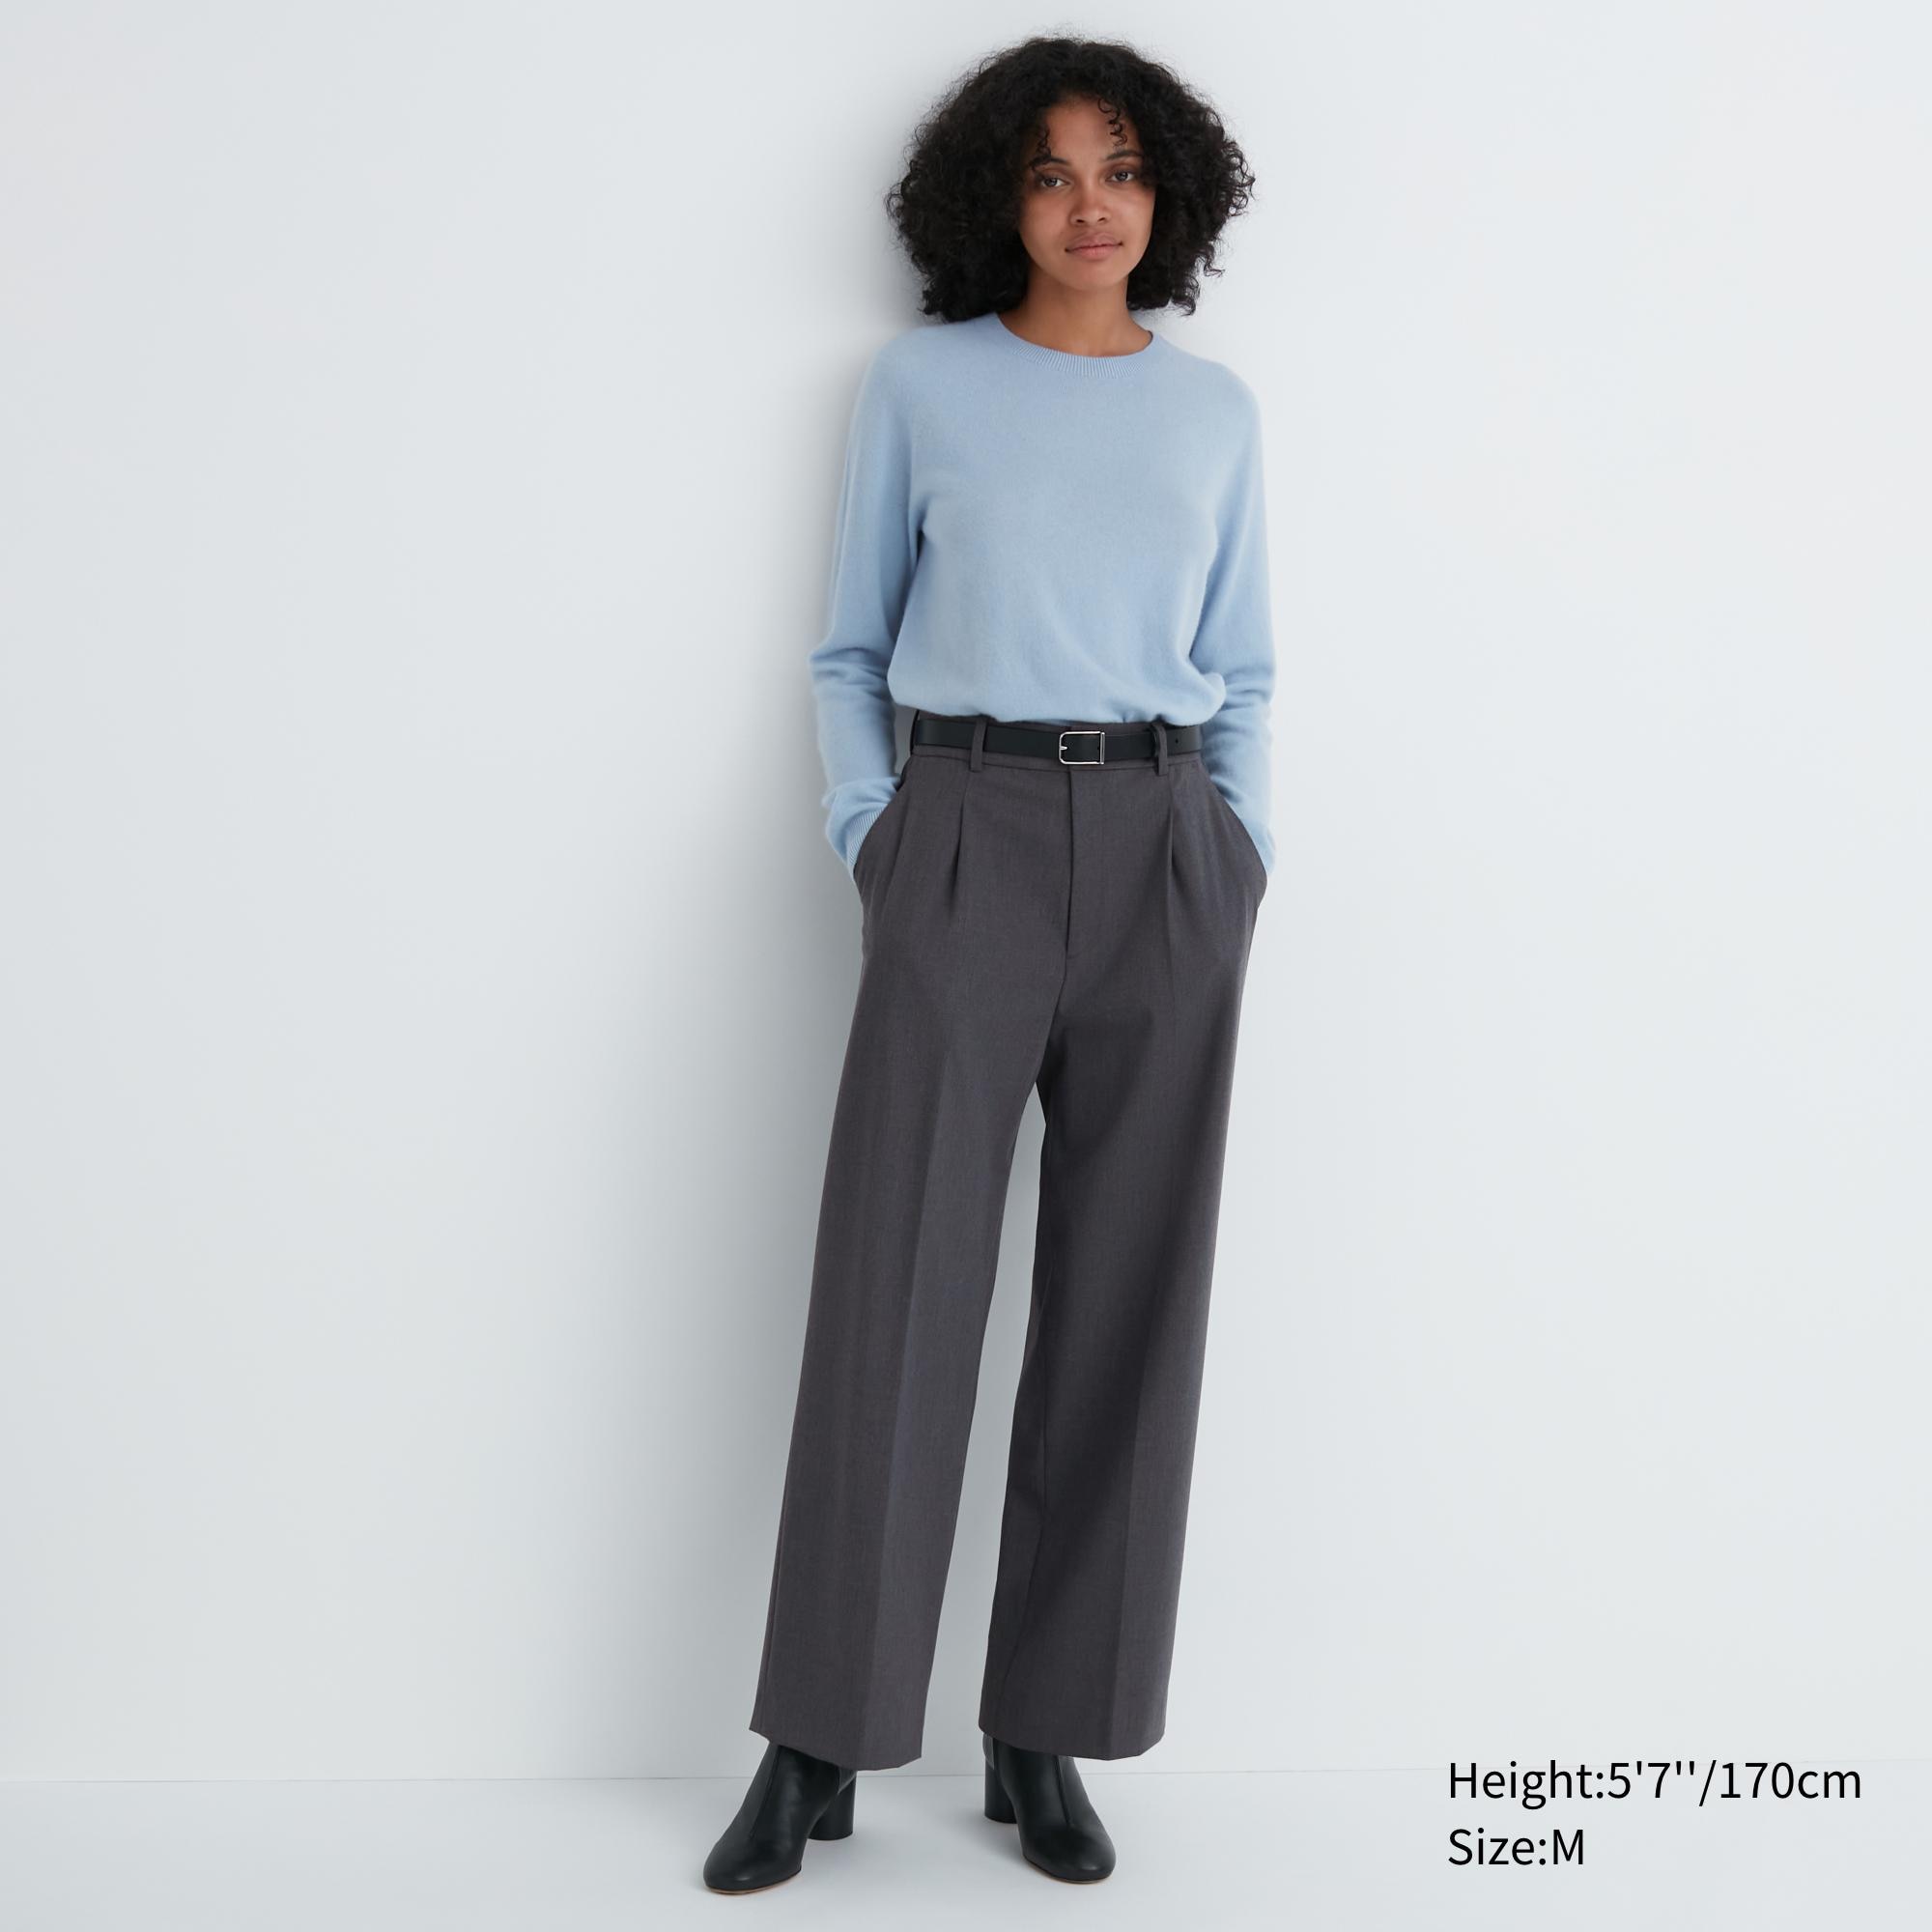 Best work trousers Uniqlo pleated trousers that TikTok loves